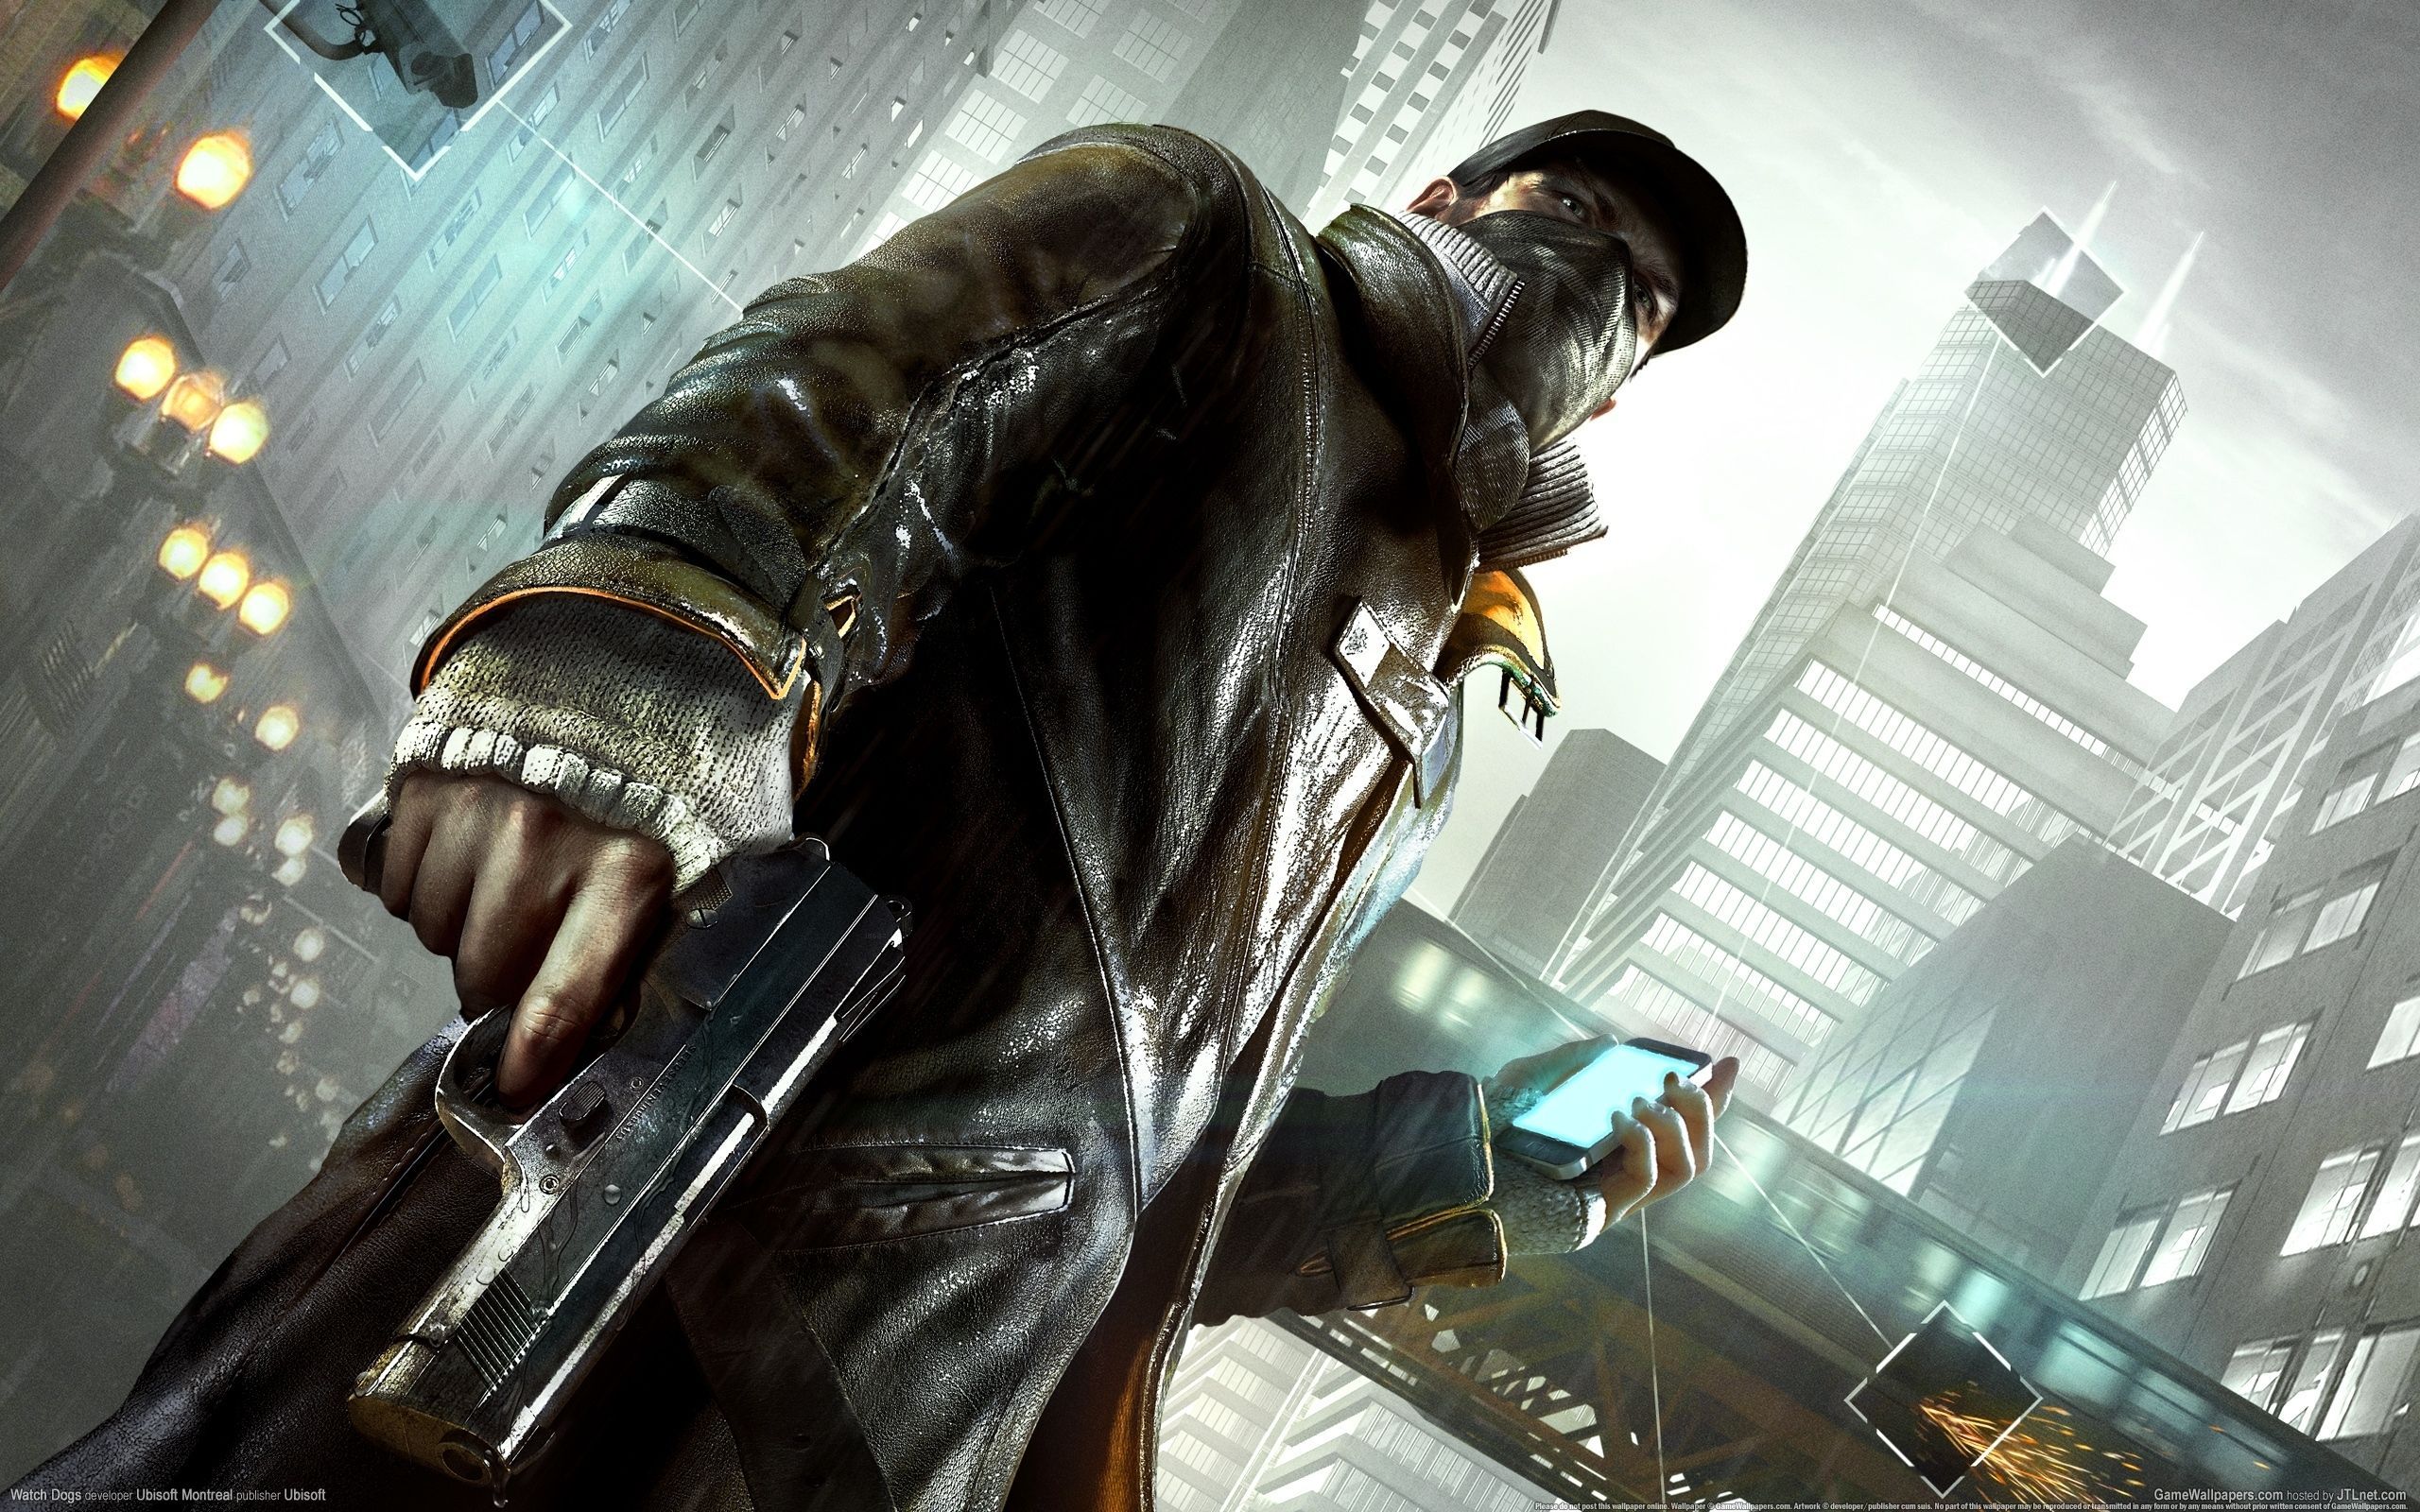 Smoky Design watch dogs video games aiden pearce artwork Wallpaper Poster  Price in India  Buy Smoky Design watch dogs video games aiden pearce  artwork Wallpaper Poster online at Flipkartcom